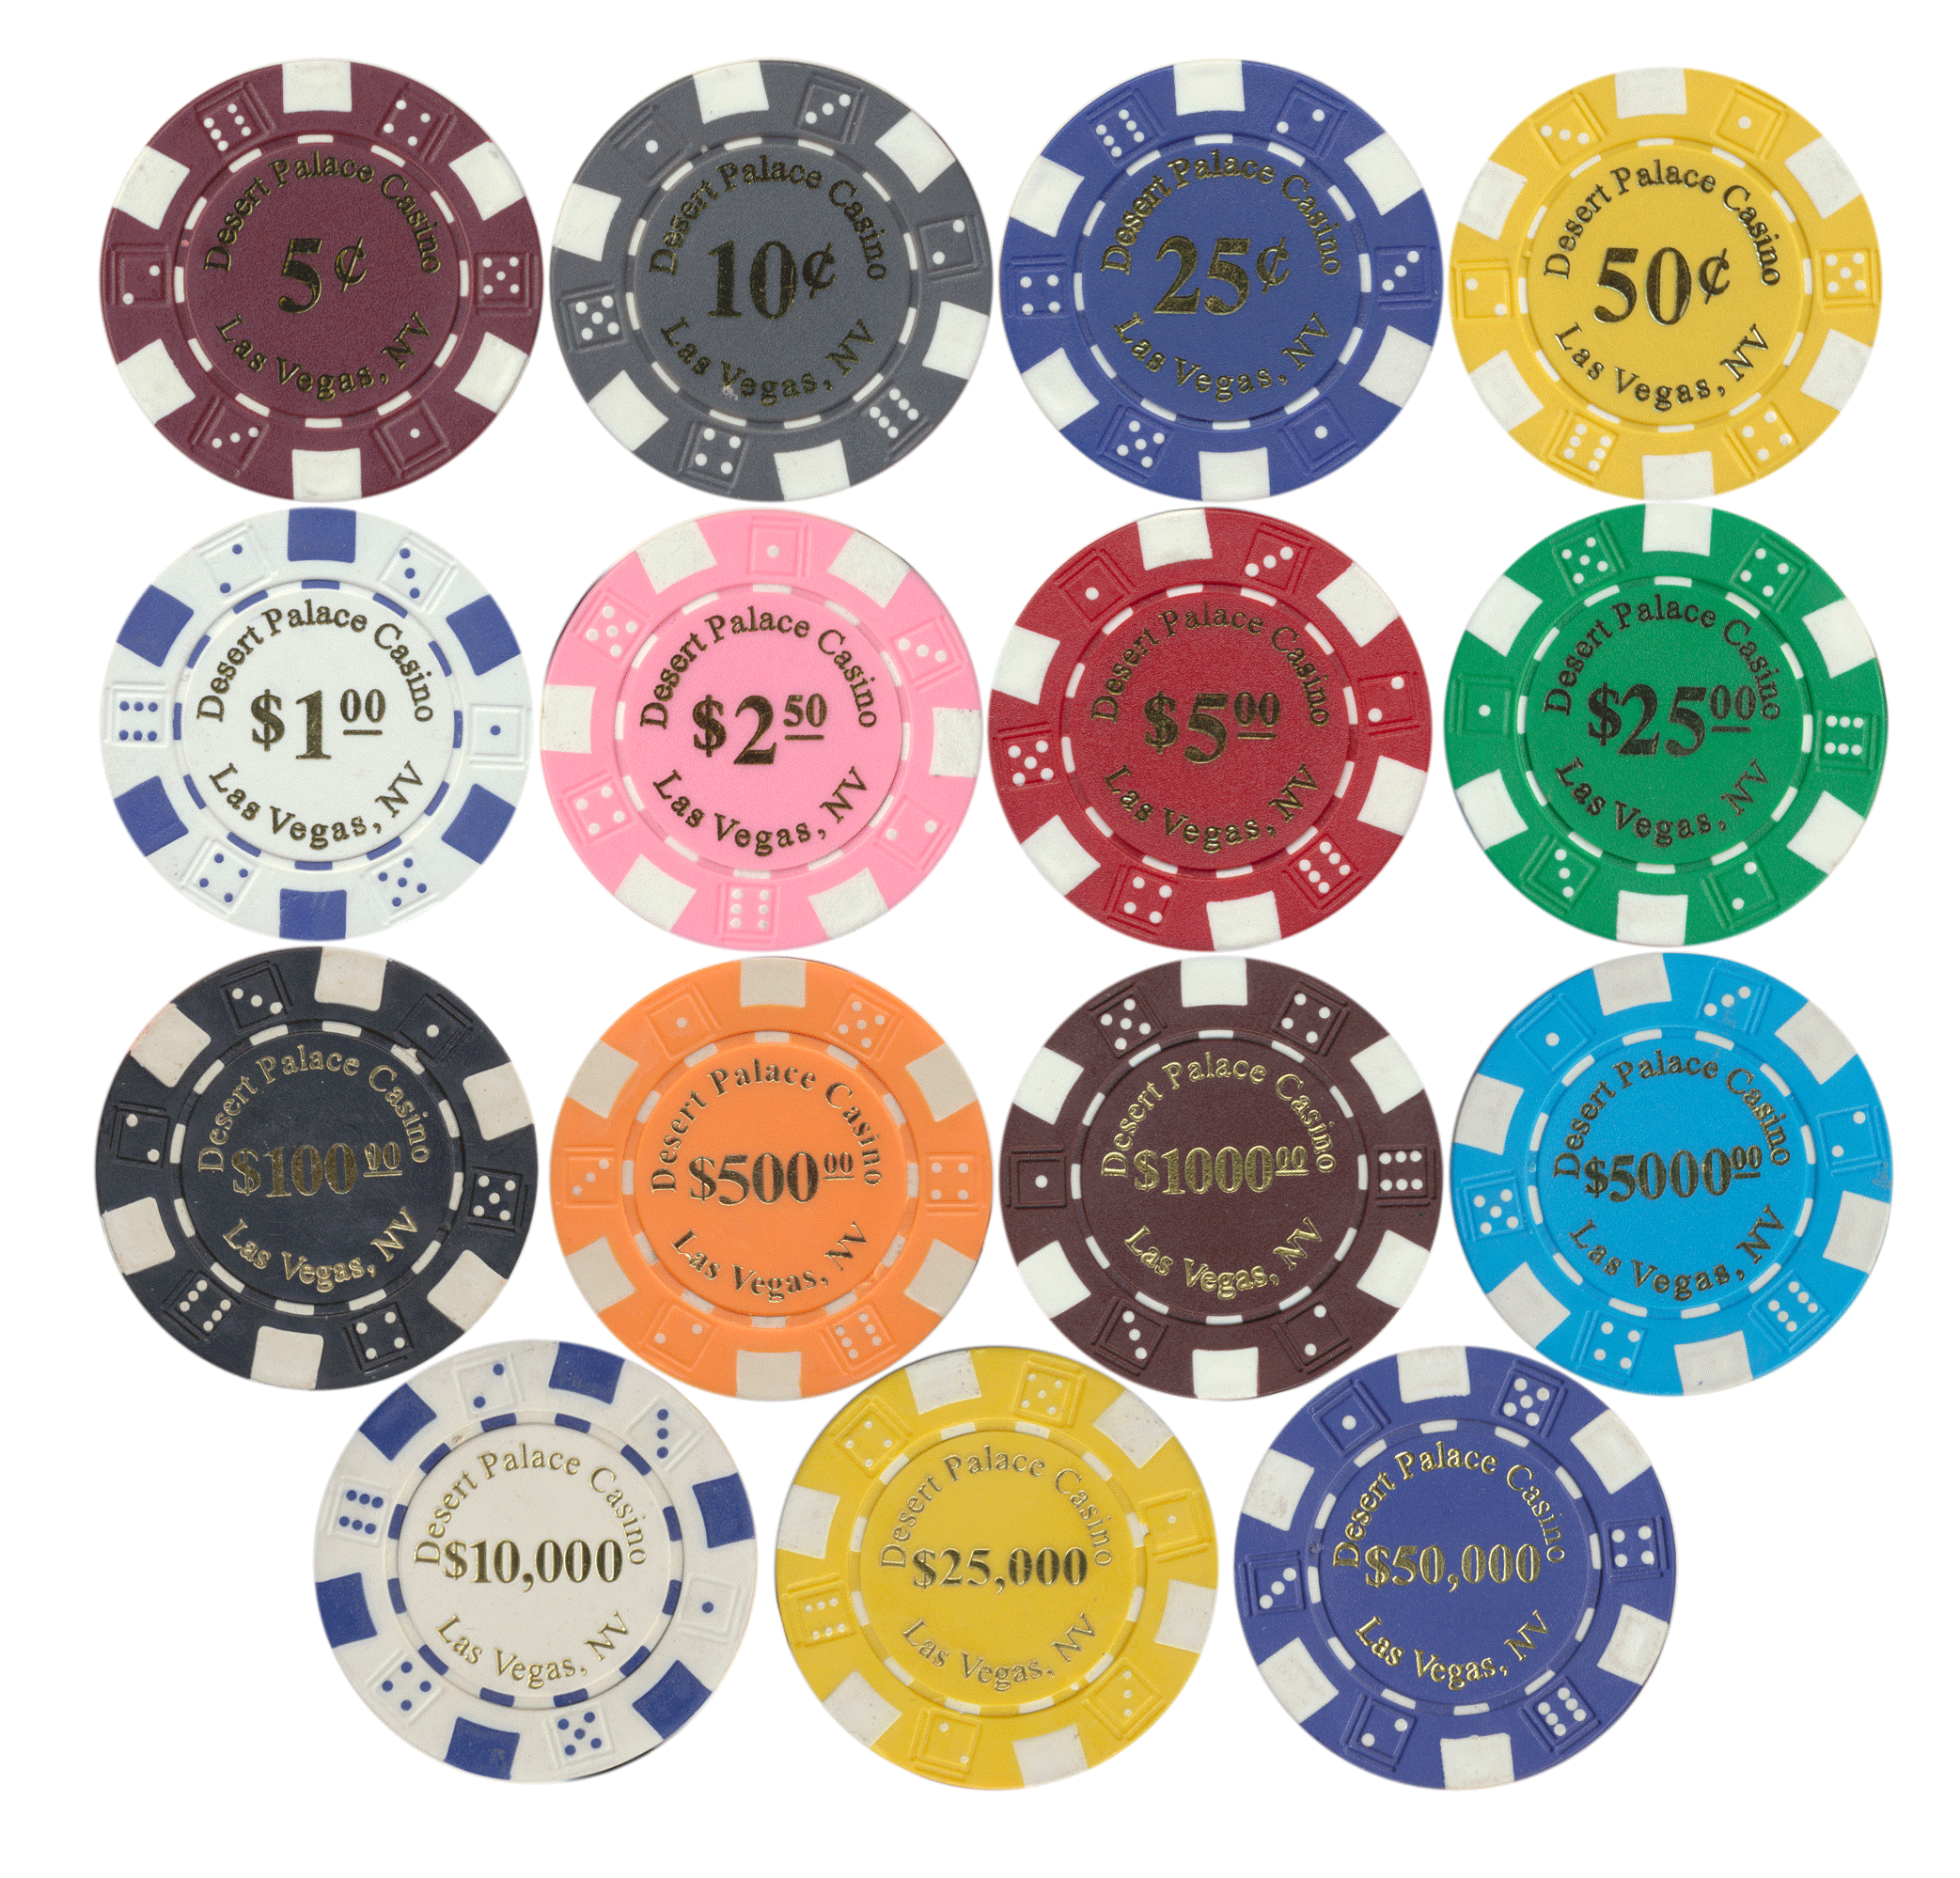 Poker Chips $25 Ace King Denomination 14 g Clay Composite 25 